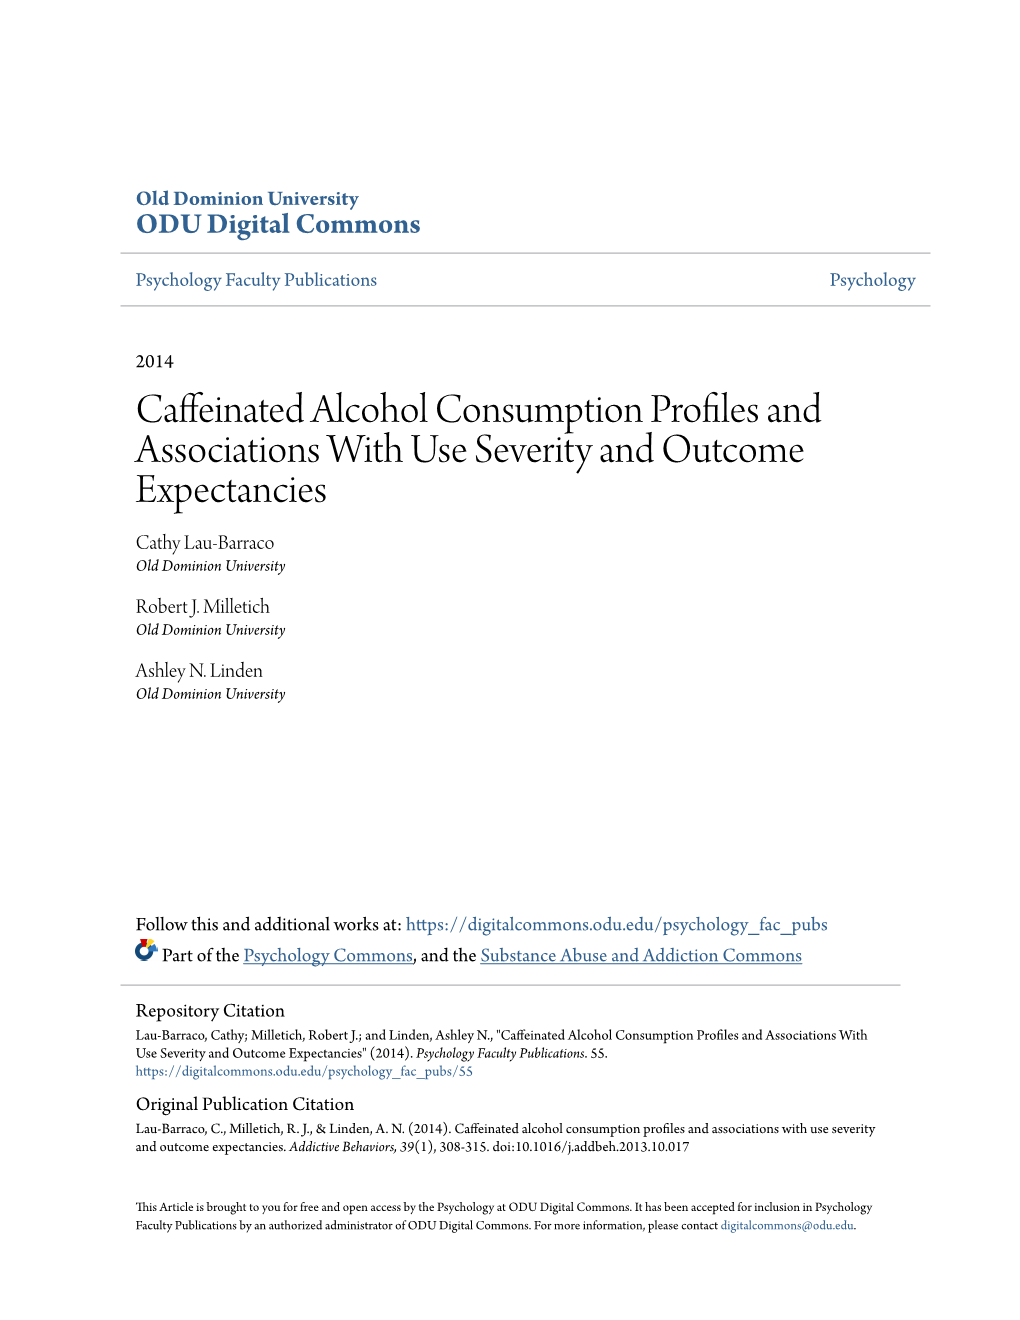 Caffeinated Alcohol Consumption Profiles and Associations with Use Severity and Outcome Expectancies Cathy Lau-Barraco Old Dominion University